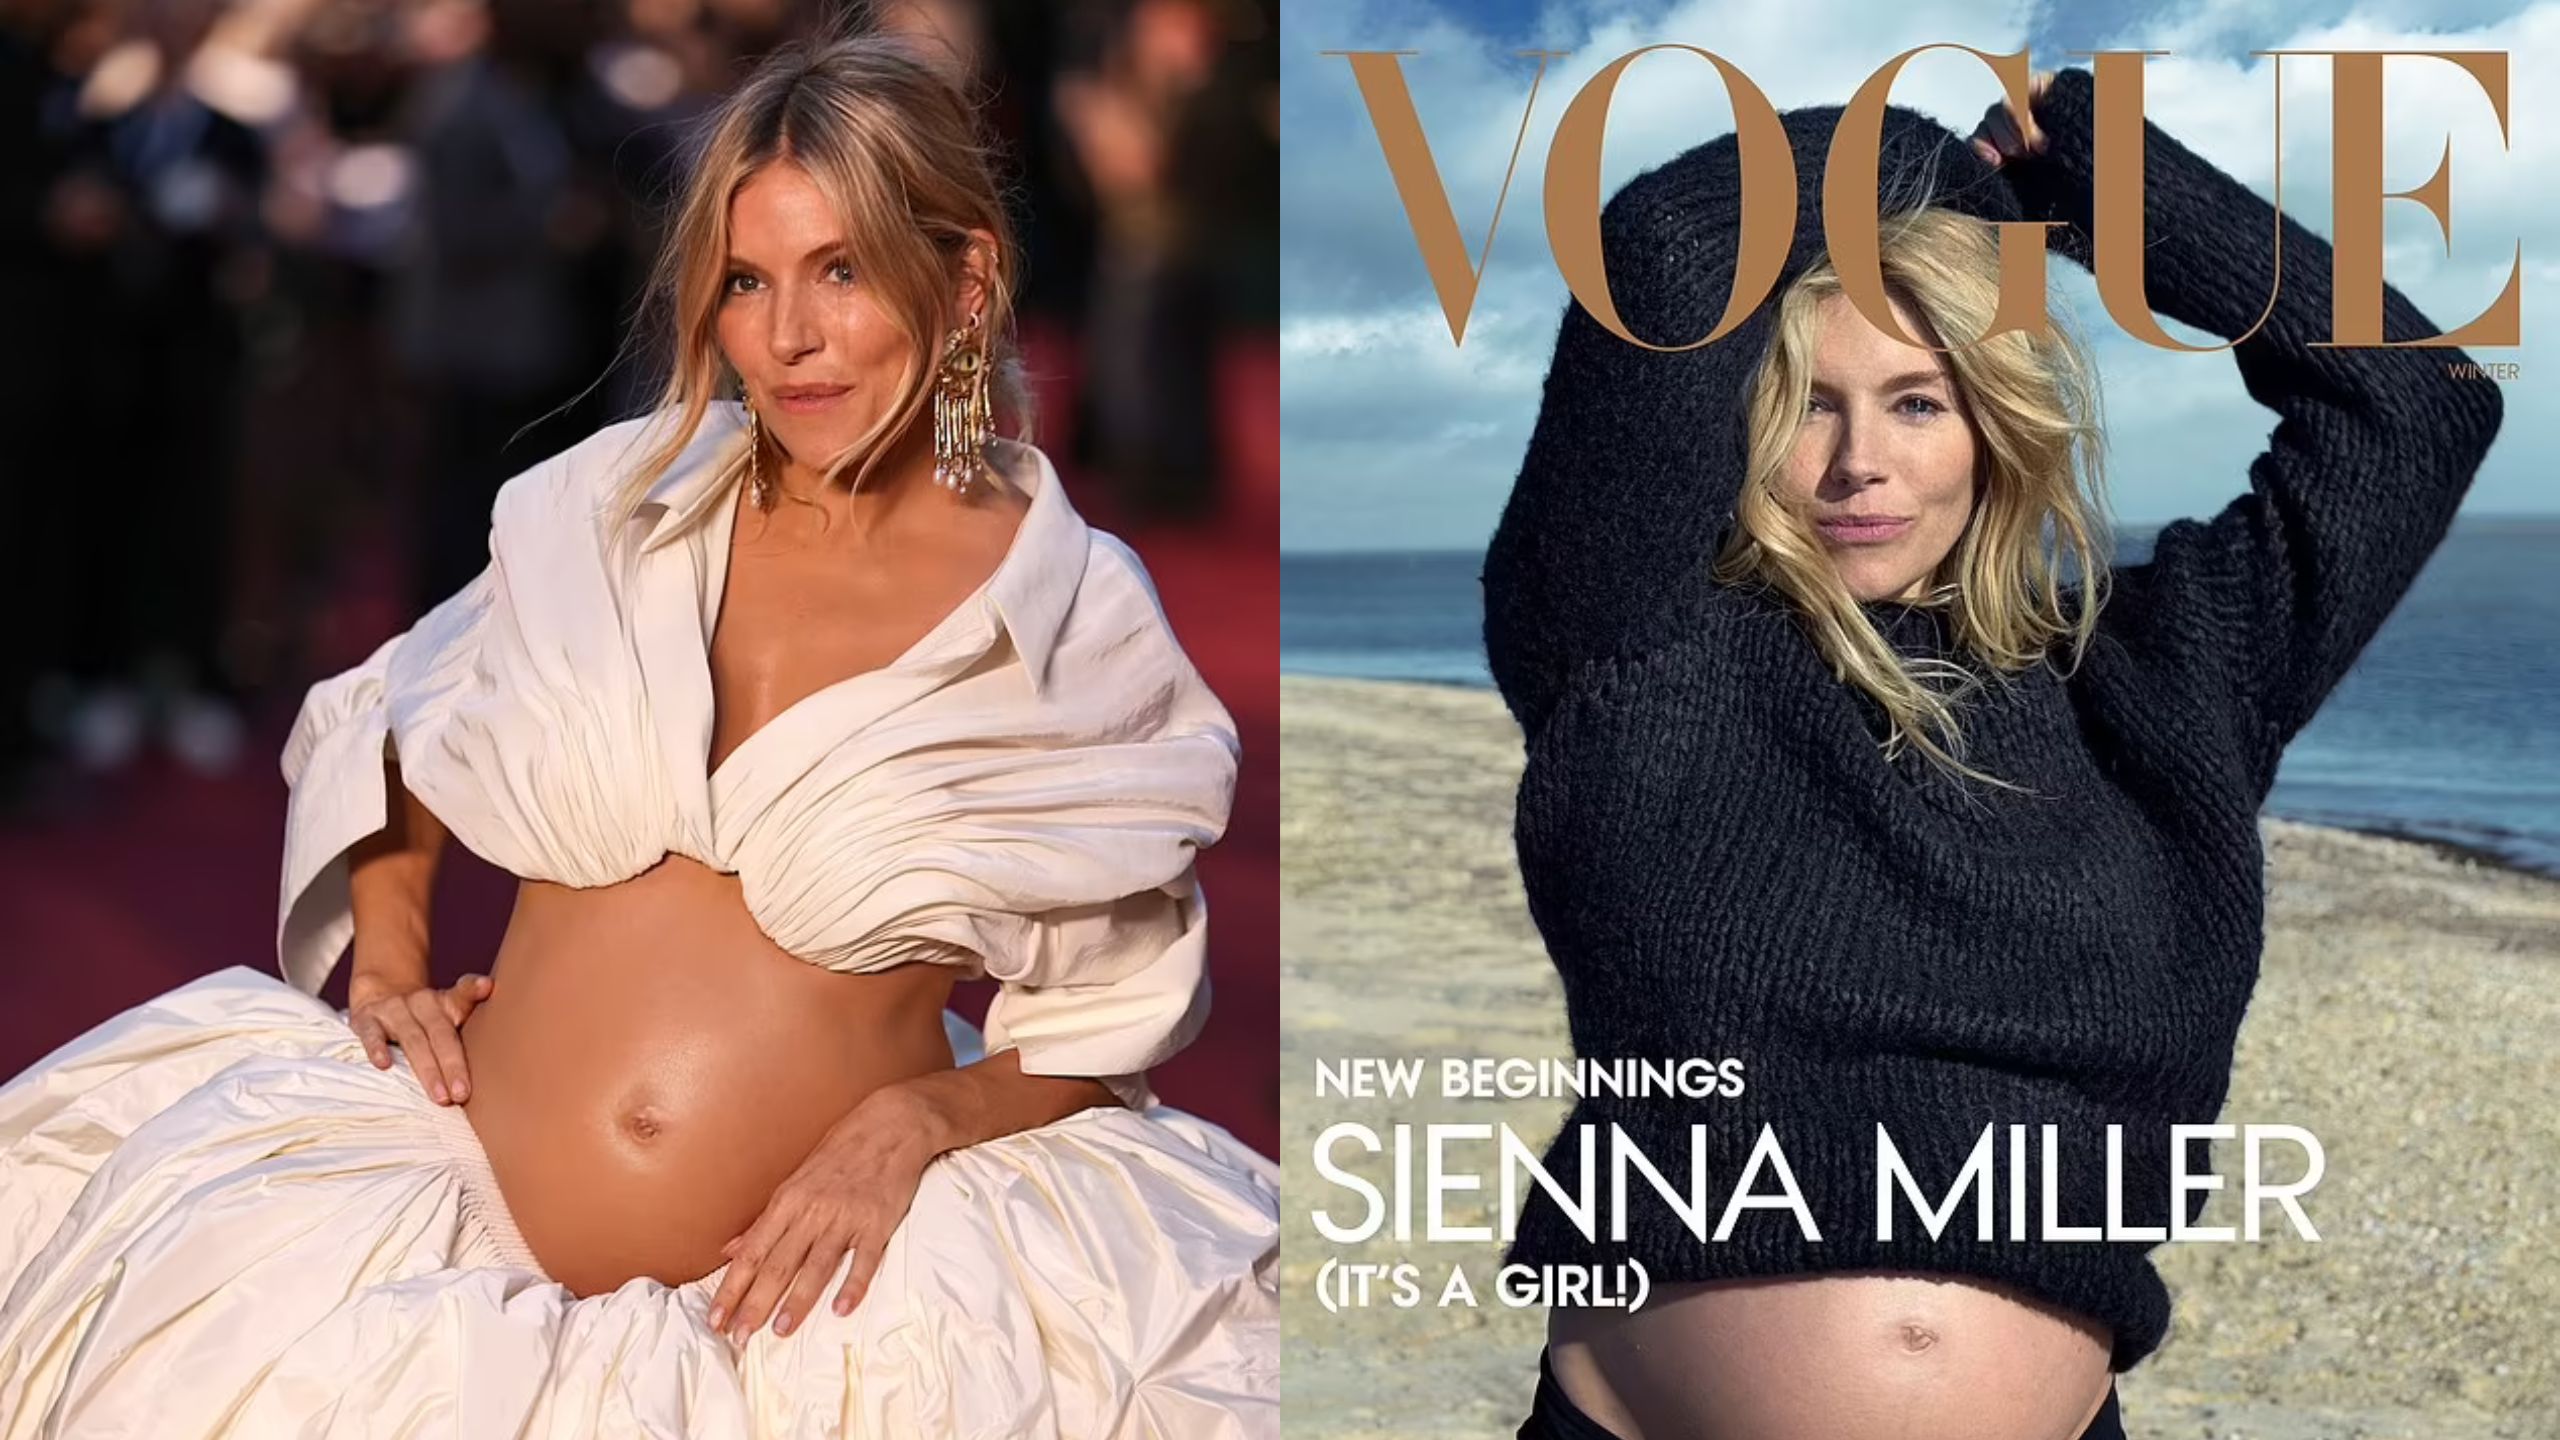 Sienna Miller at Vogue World Event and magazine cover